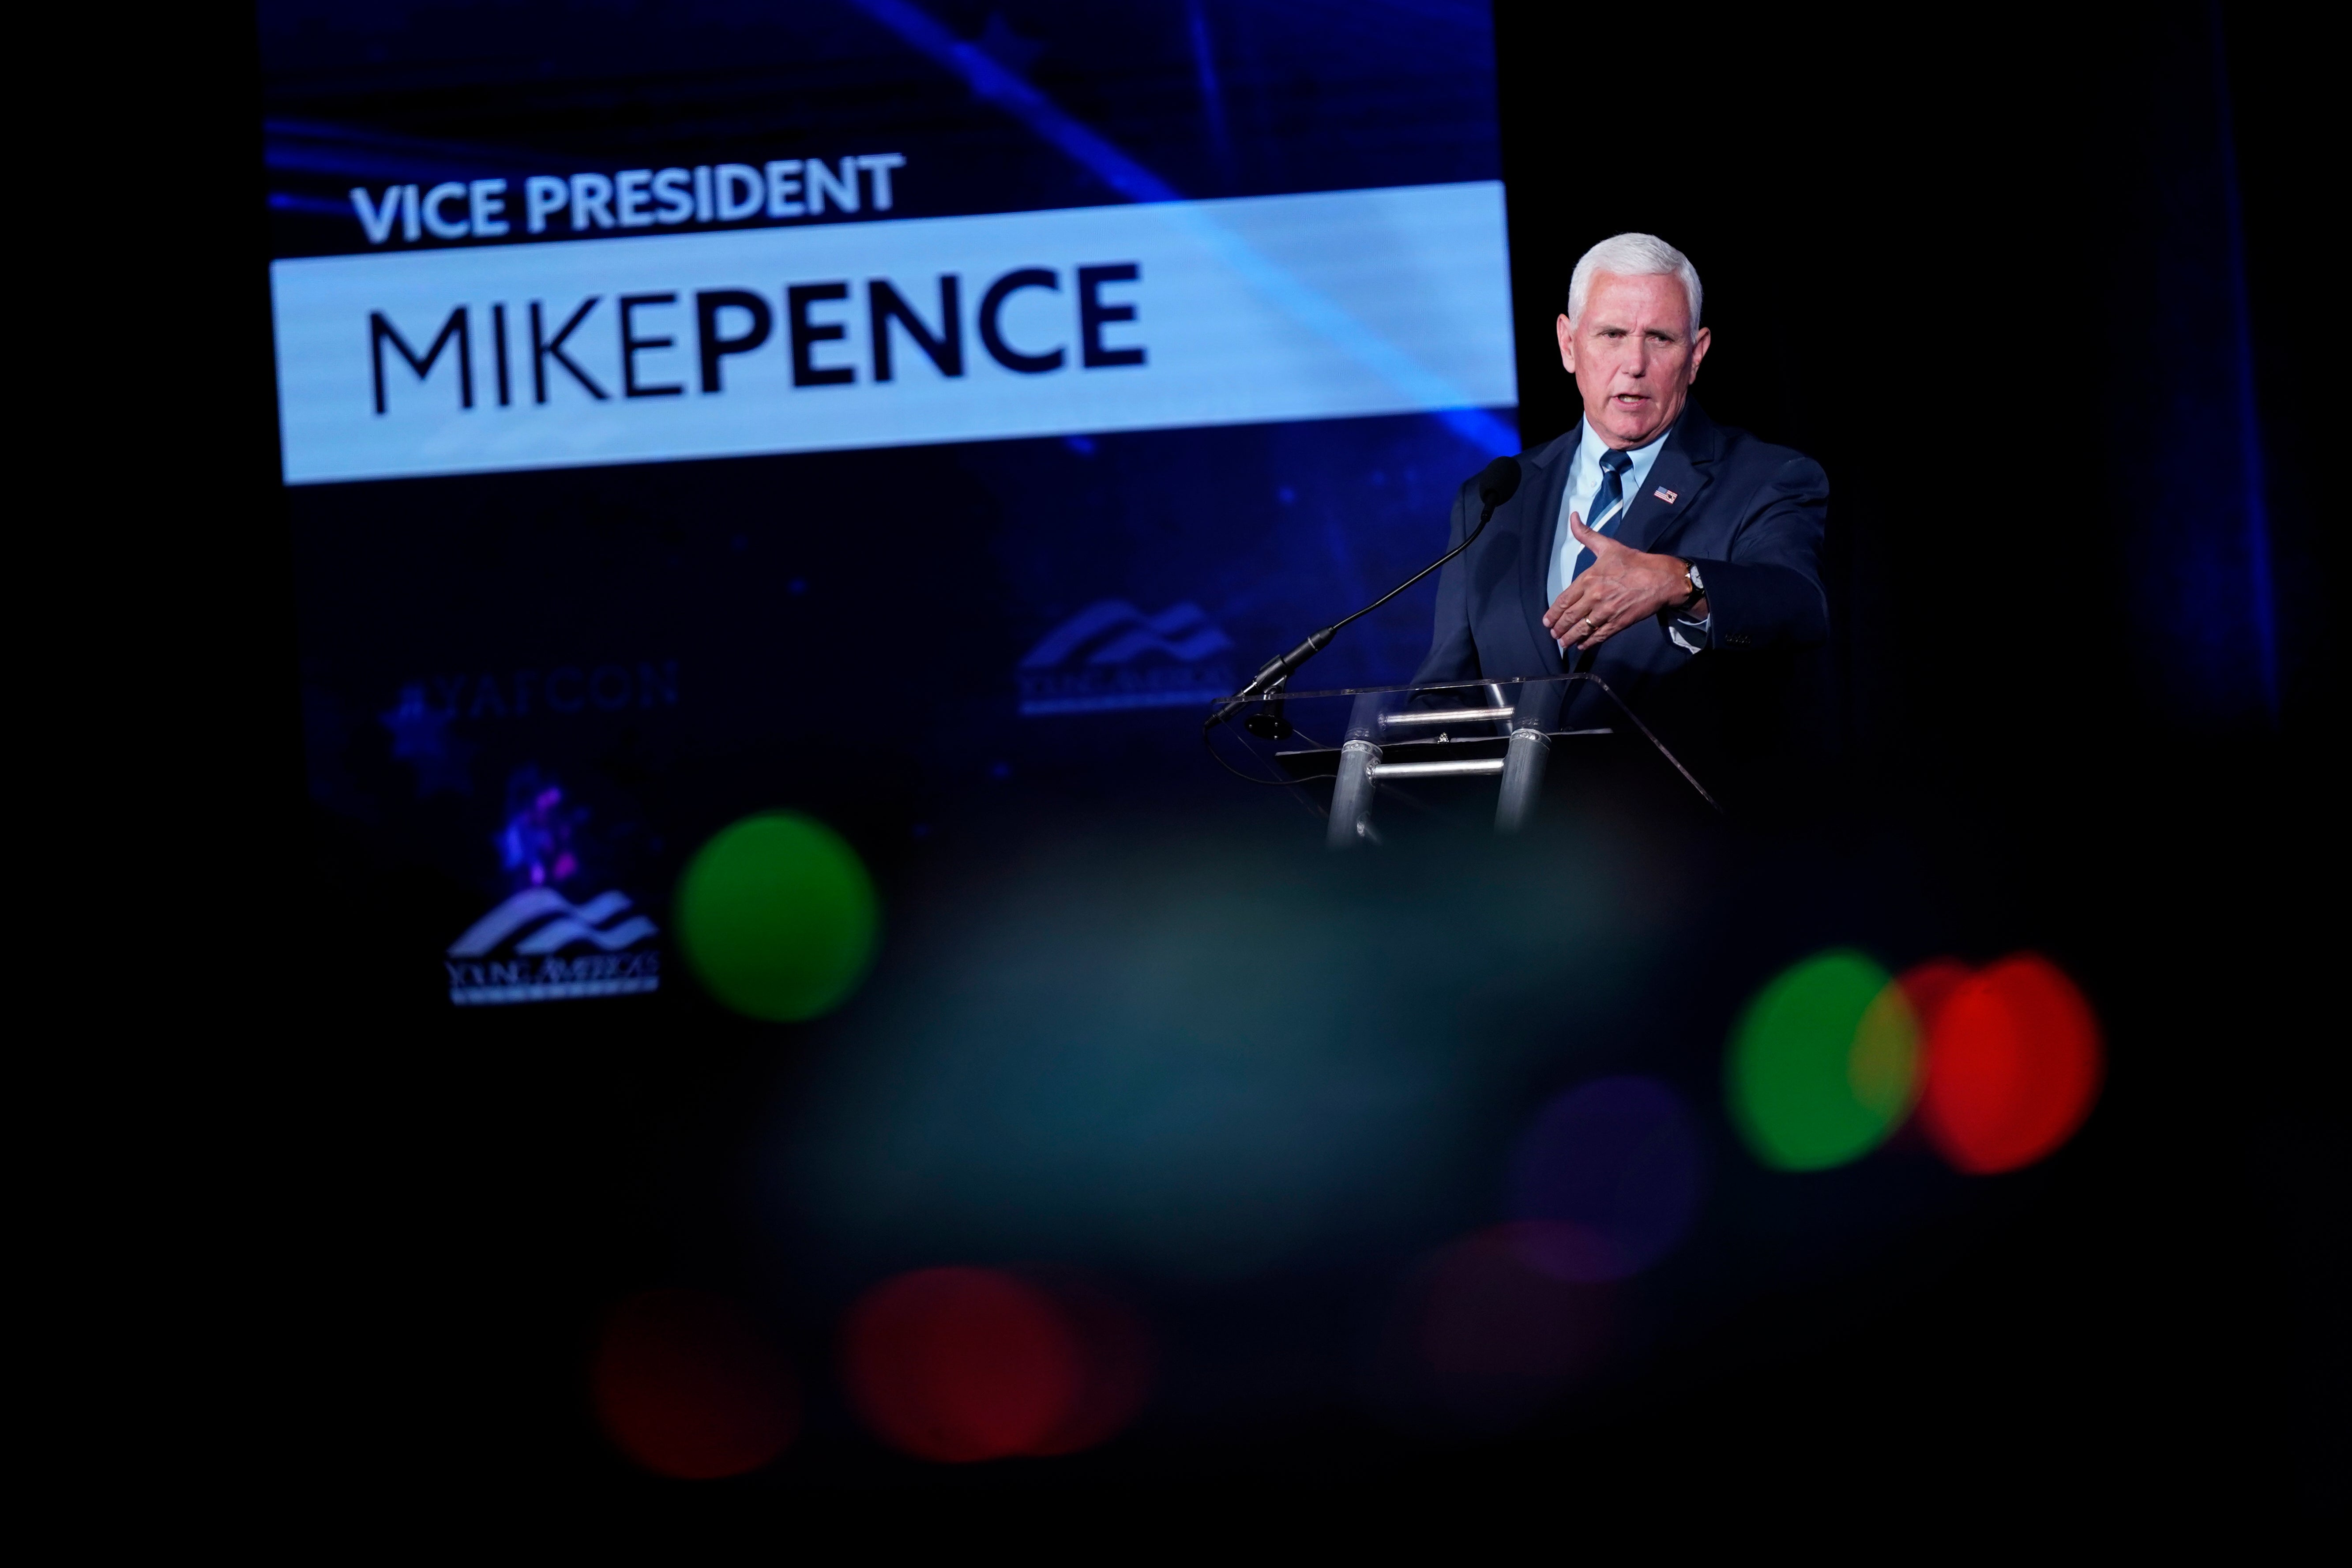 Former Vice President Mike Pence speaks at the Young America's Foundation's National Conservative Student Conference, Tuesday, July 26, 2022, in Washington